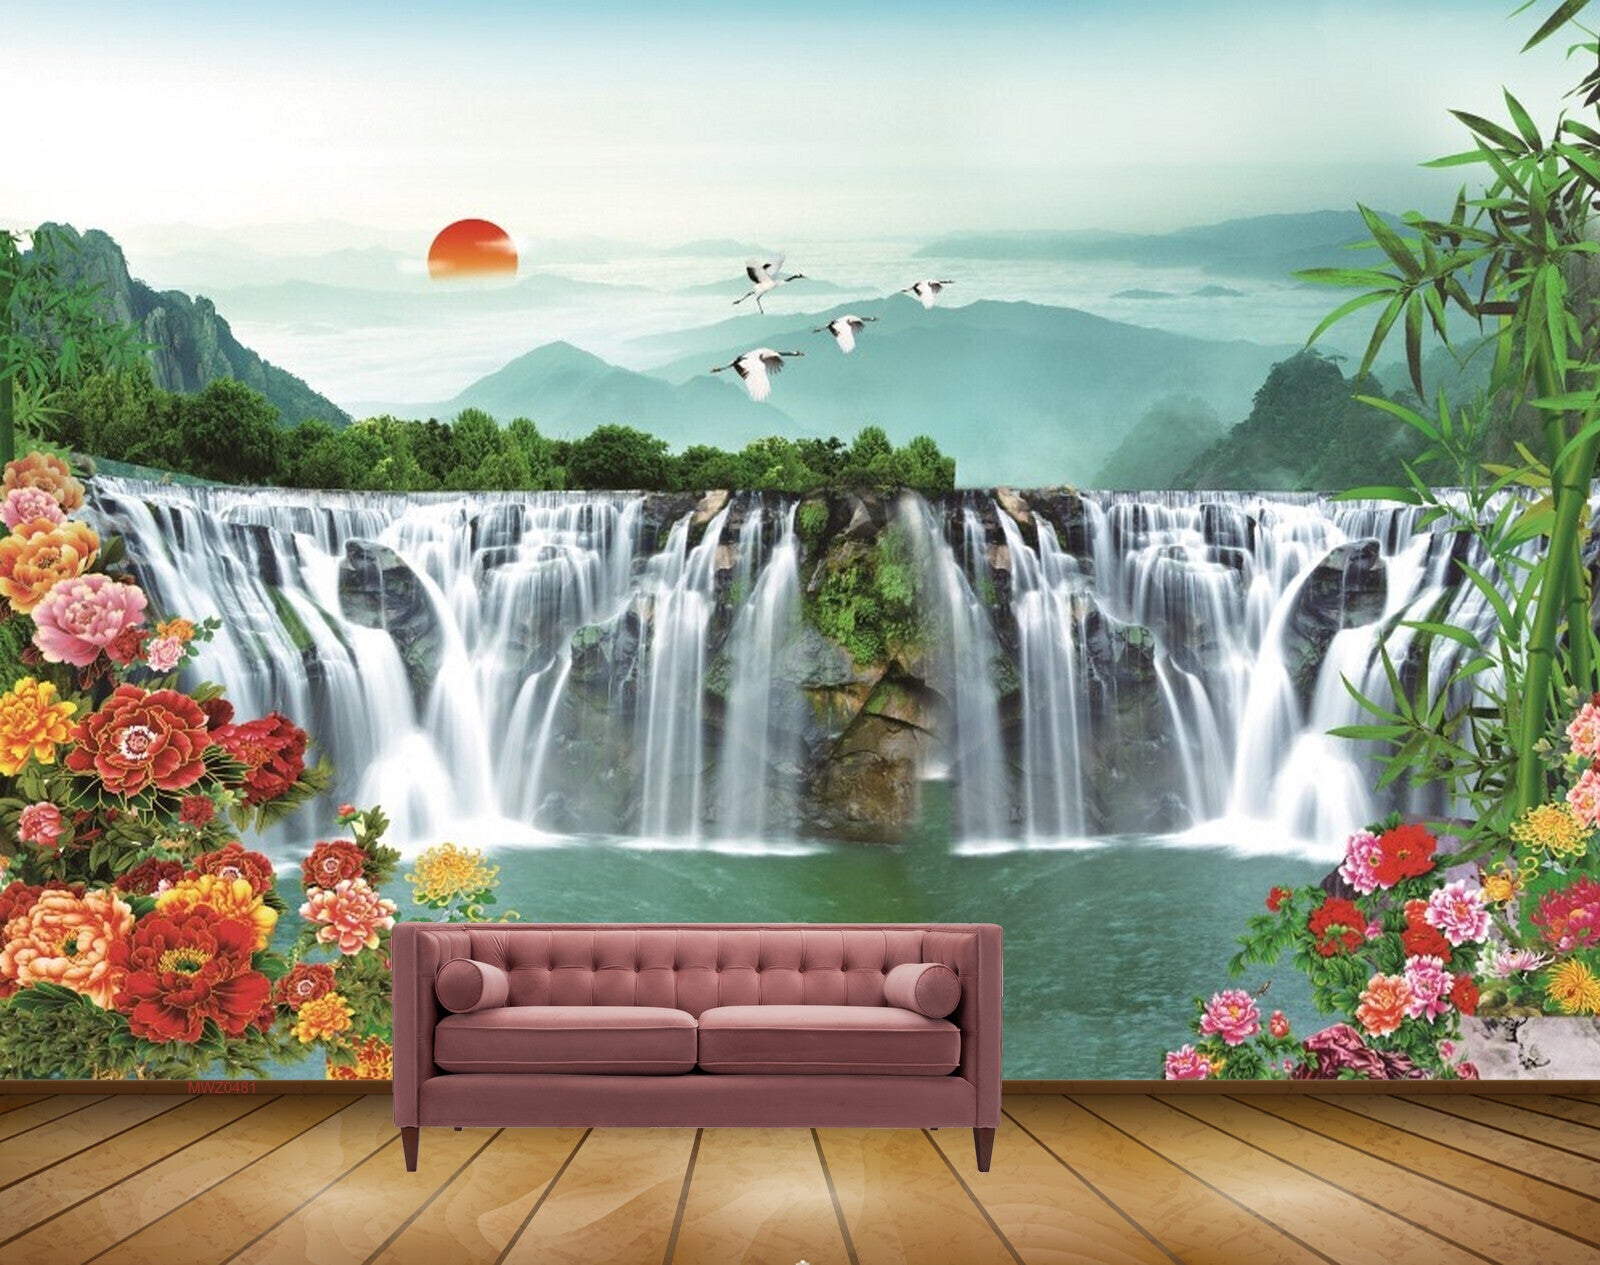 Buy Avikalp Exclusive Vinyl Beautiful Scenery Swan Lake Full HD 3D Wallpaper  4x3ft Multicolour Awi2243 Online at Low Prices in India  Amazonin